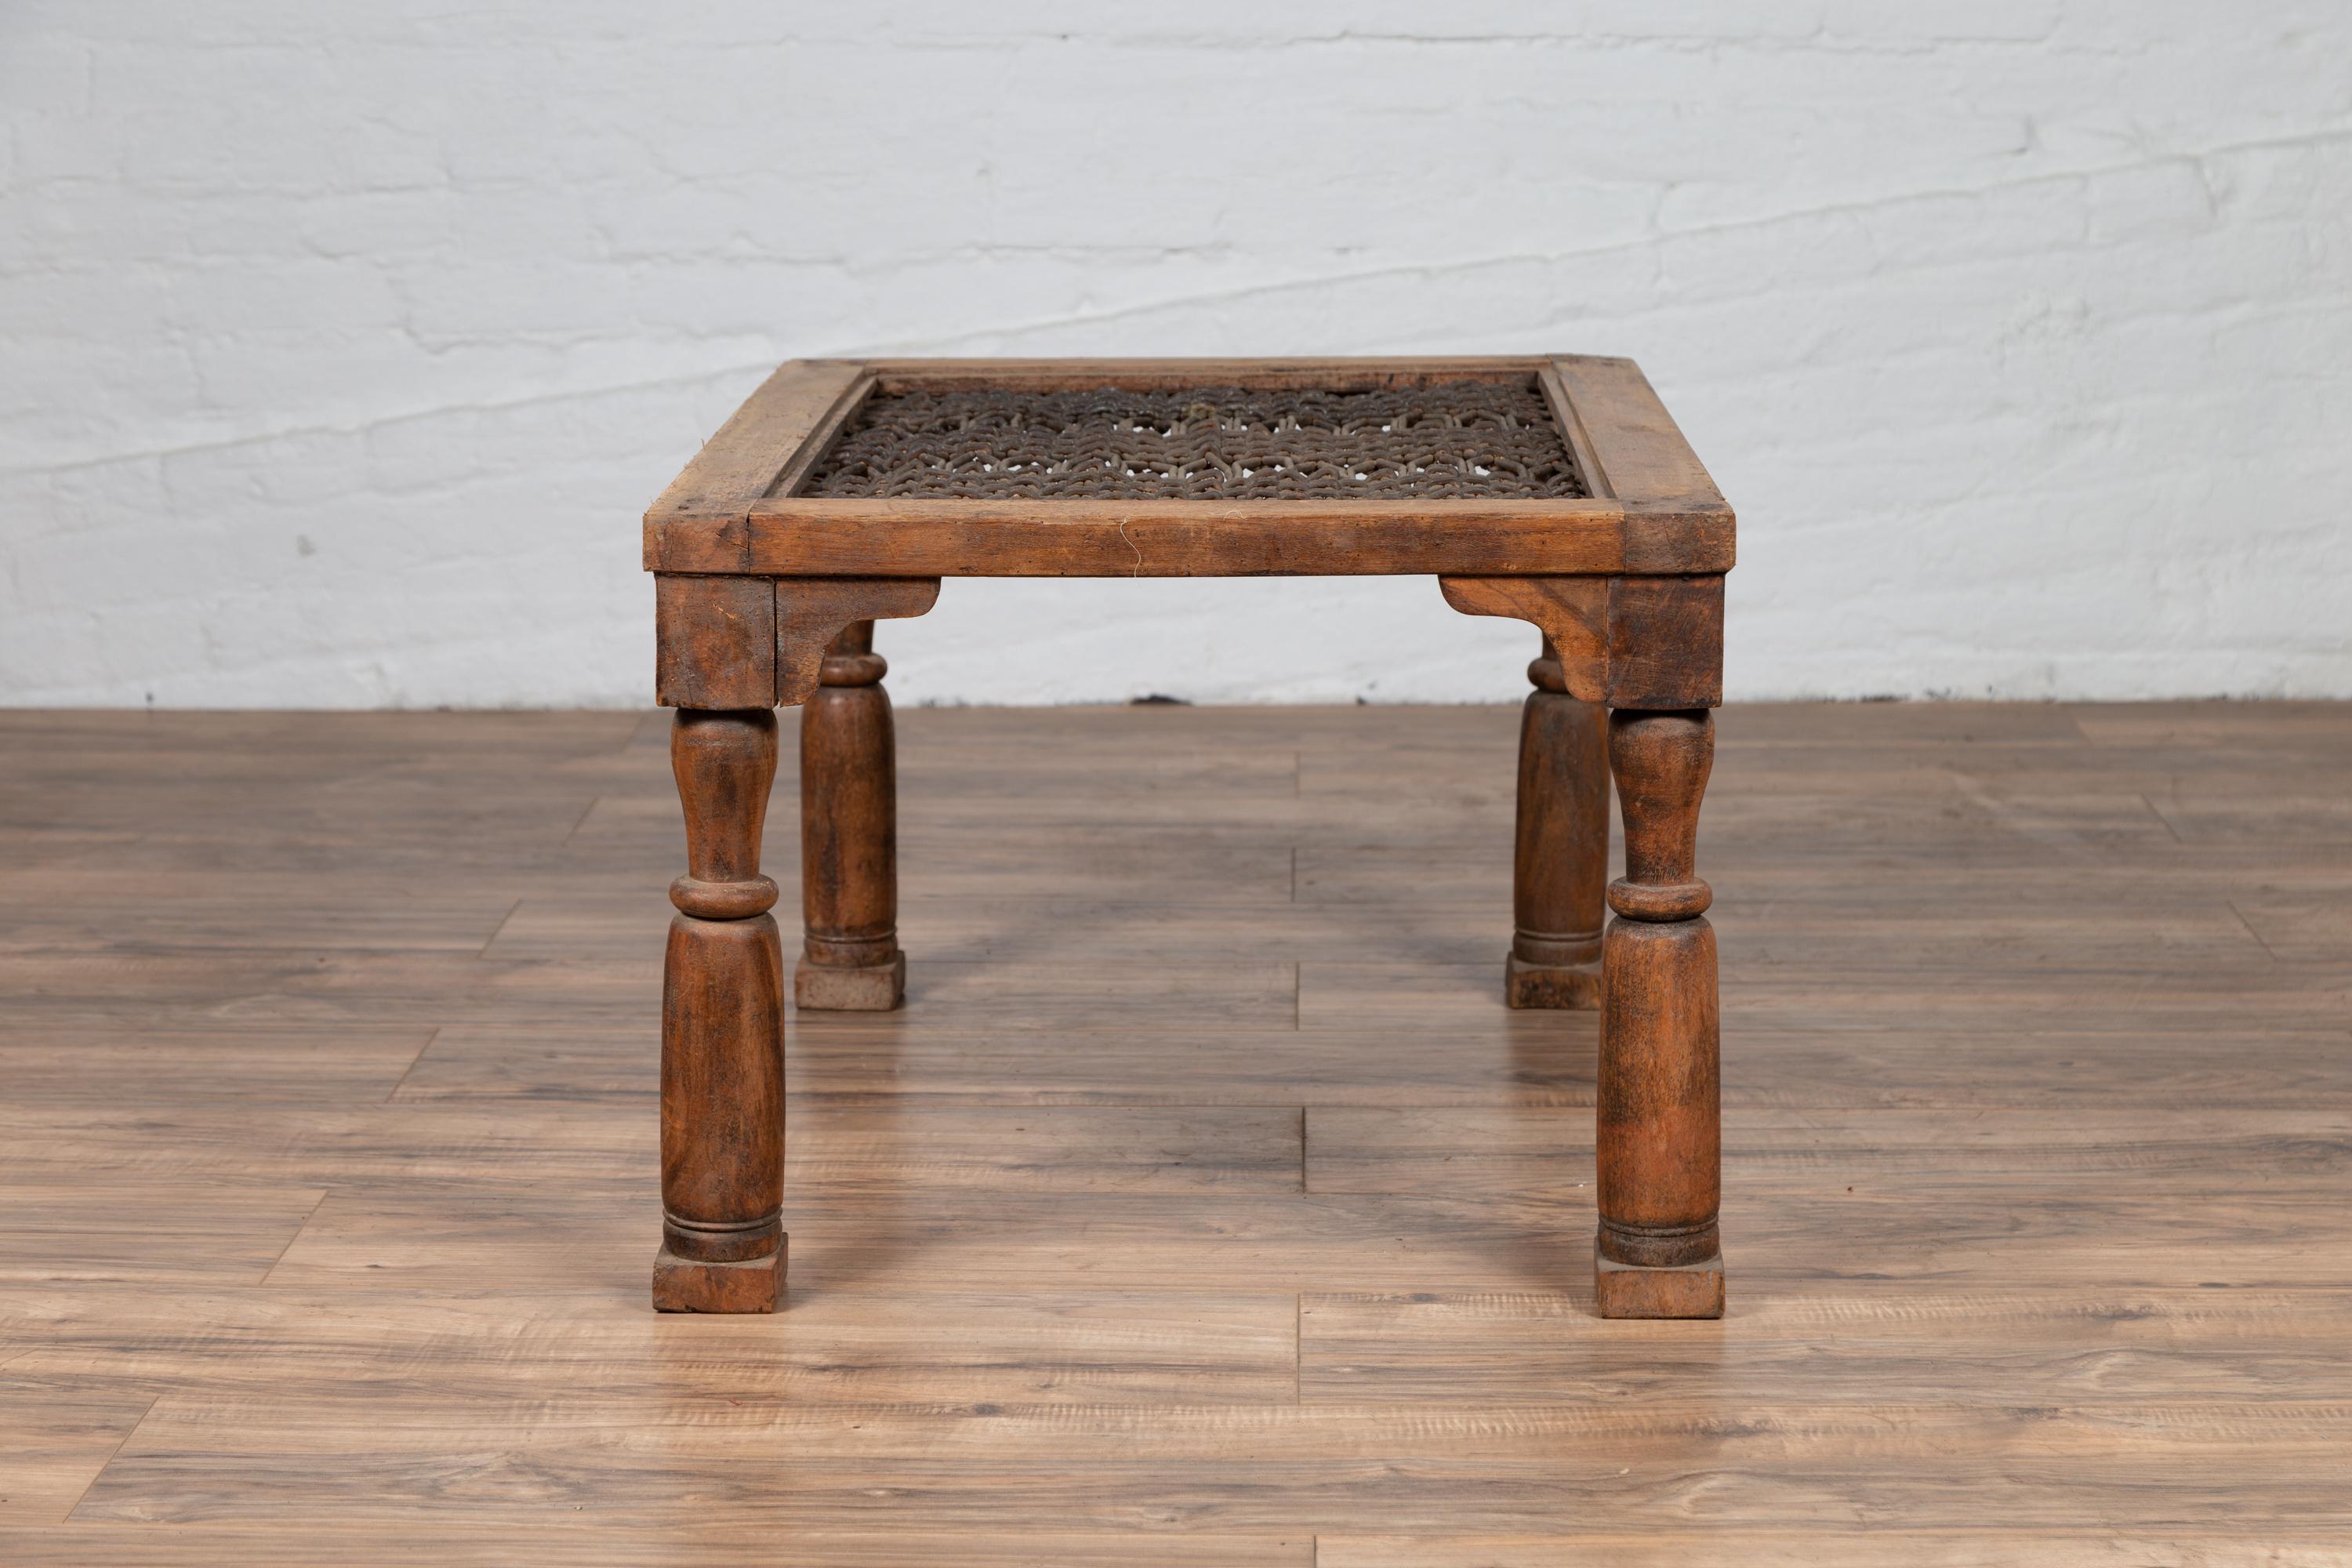 Antique Indian Wooden Side Table with Window Grate and Turned Baluster Legs For Sale 1